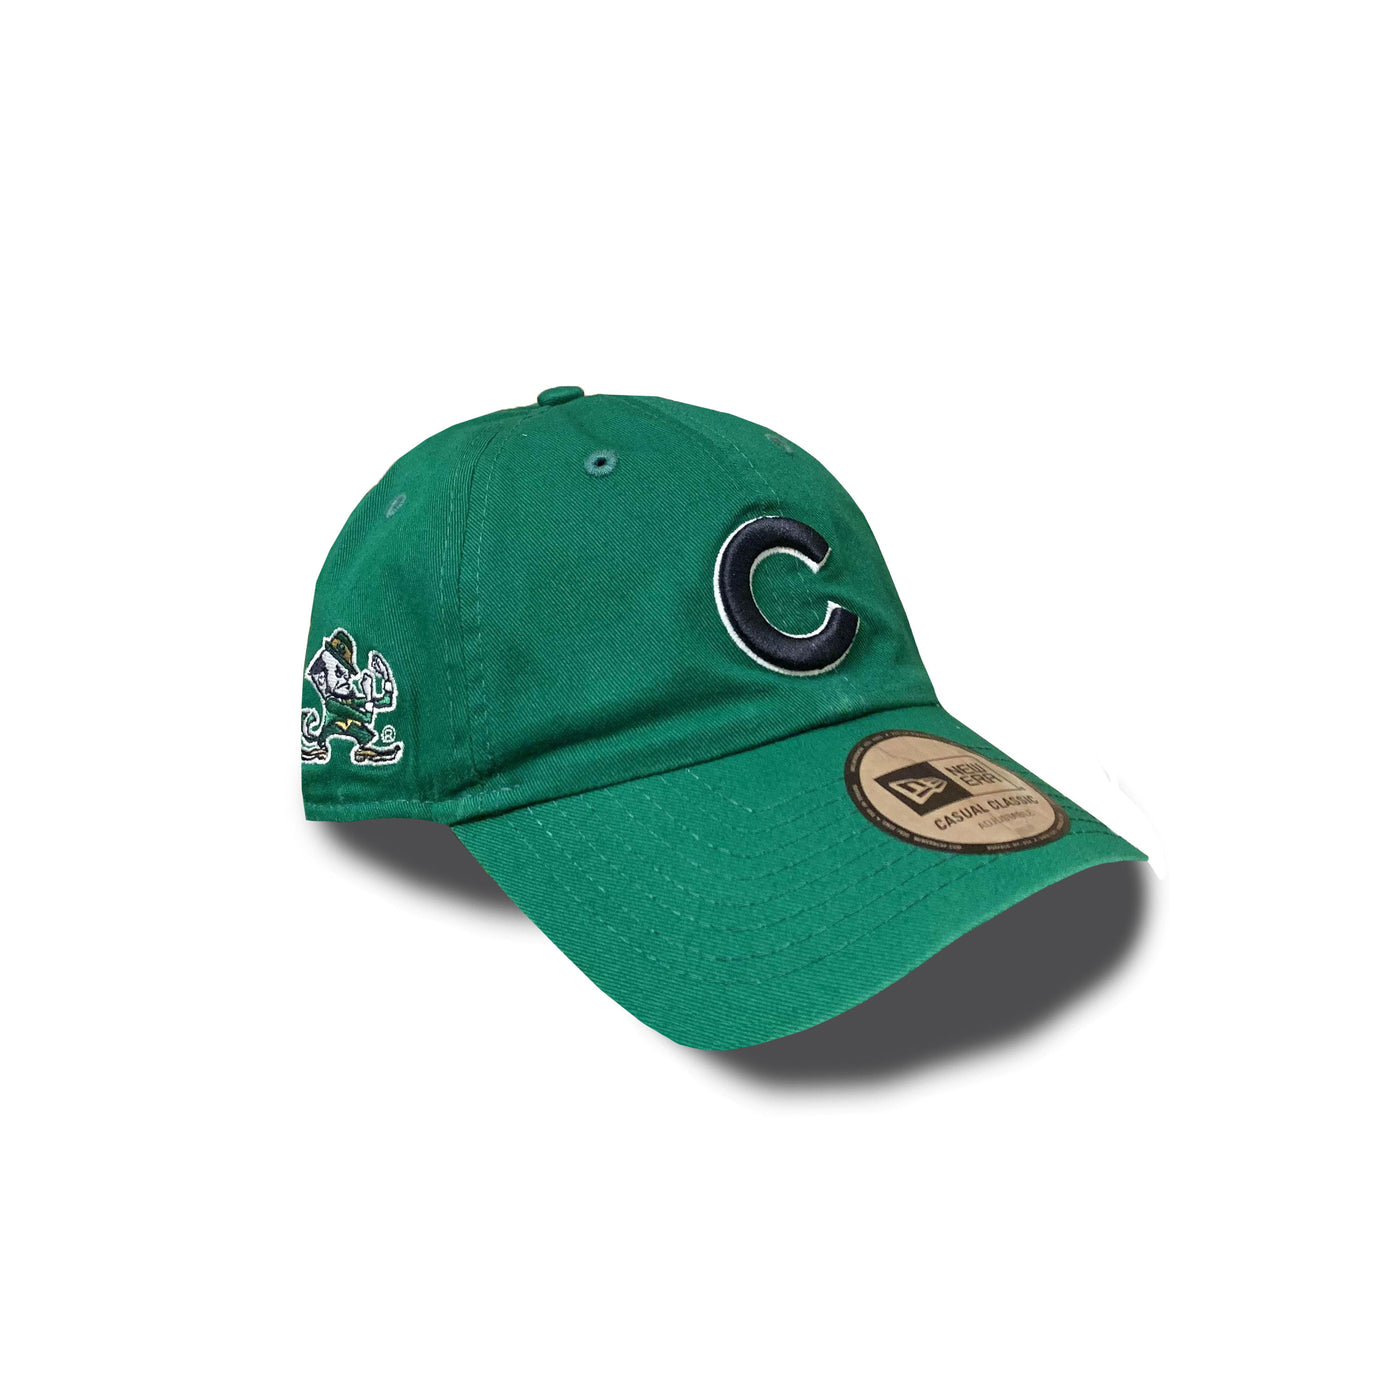 CHICAGO CUBS AND UNIVERSITY OF NOTRE DAME GREEN ADJUSTABLE CAP - Ivy Shop